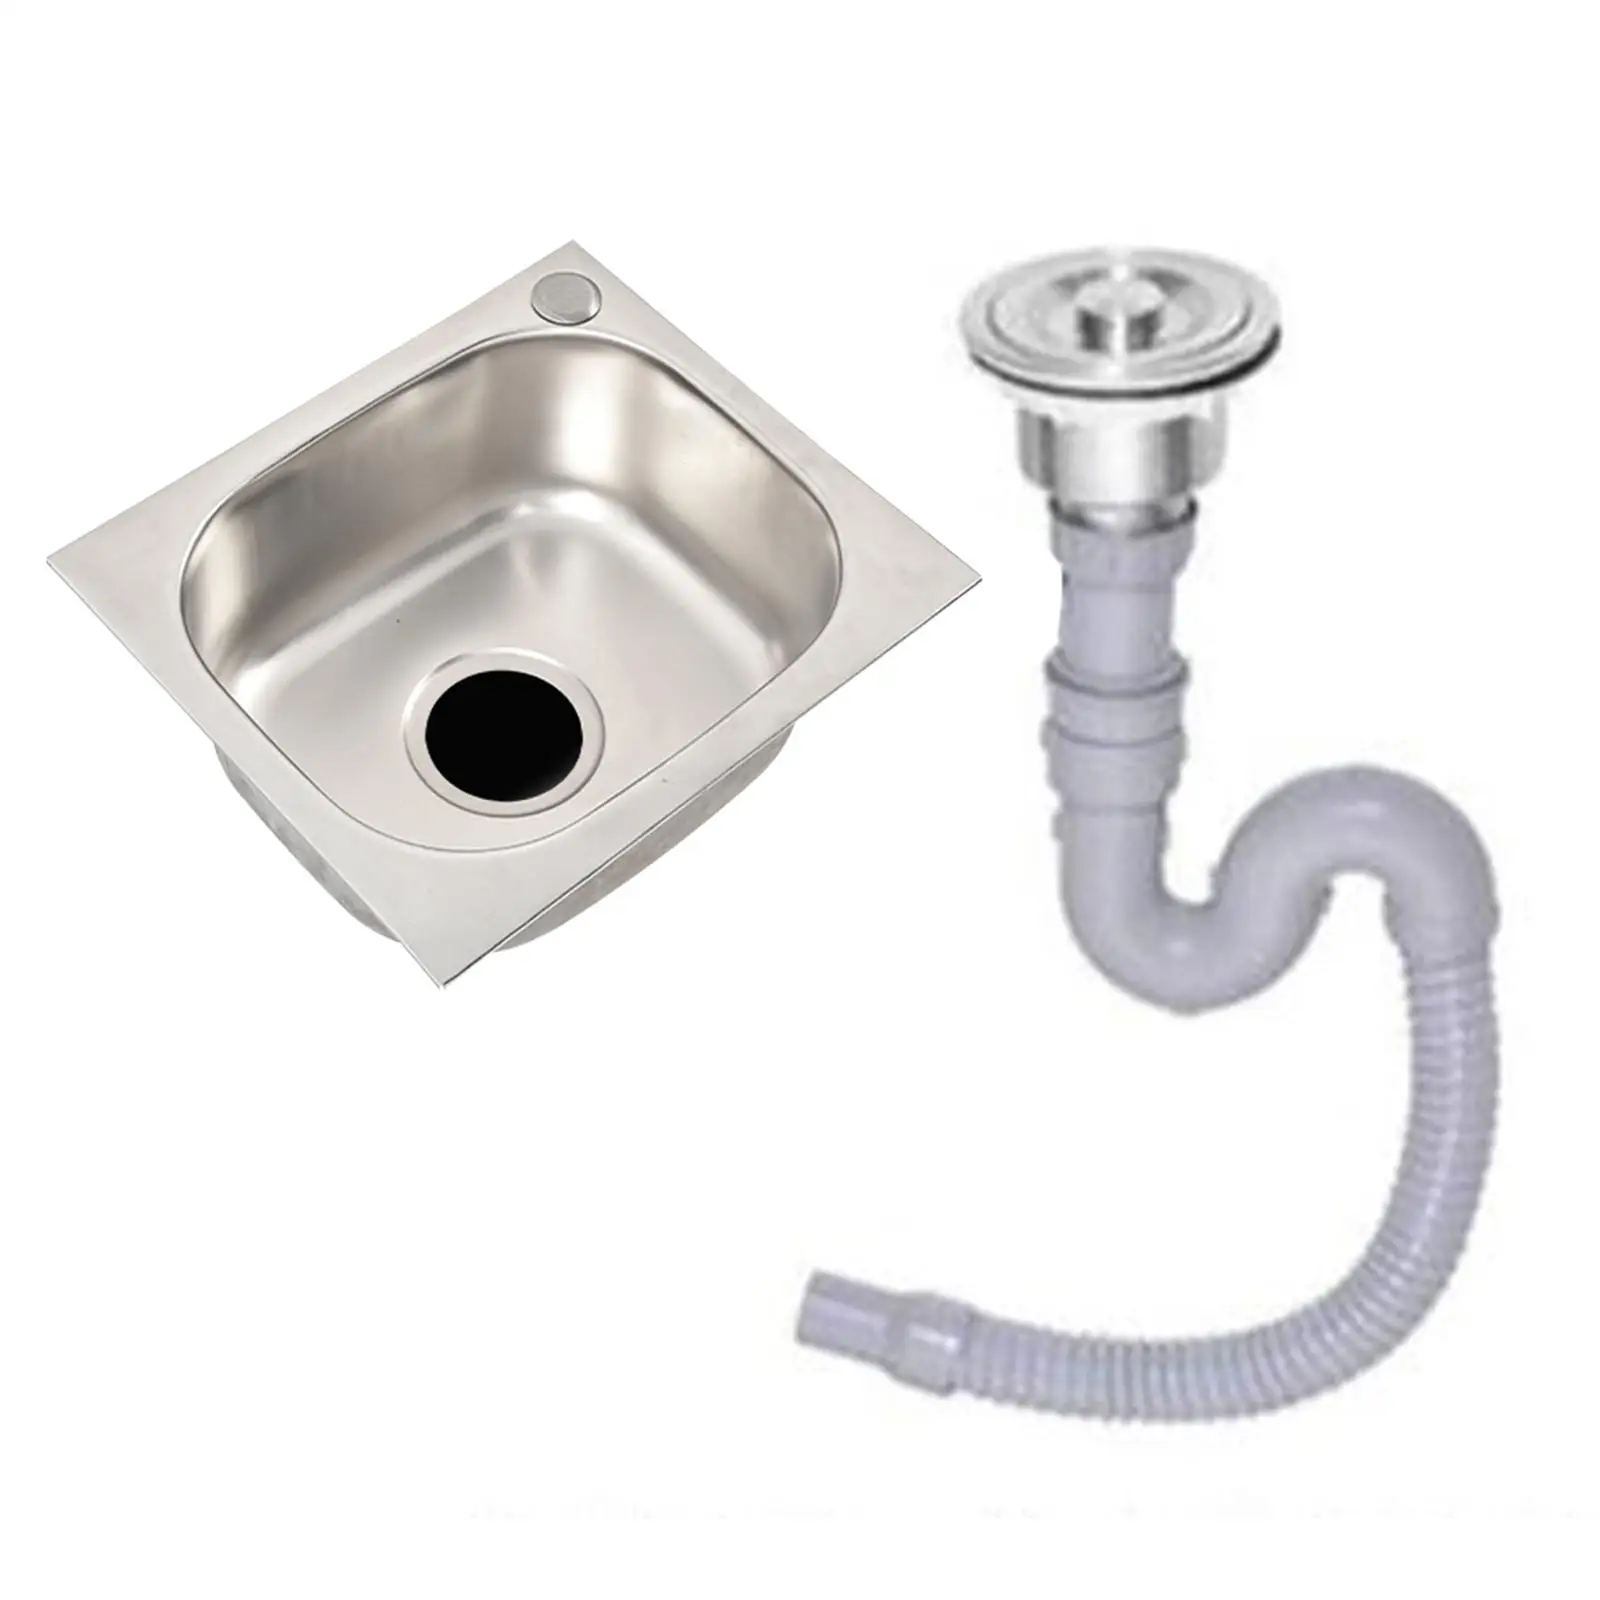 Stainless Steel Kitchen Sink with Drain Hole Fast Drainage Rustproof 37cmx32cmx14cm with Water Pipe Rectangle Single Bowl